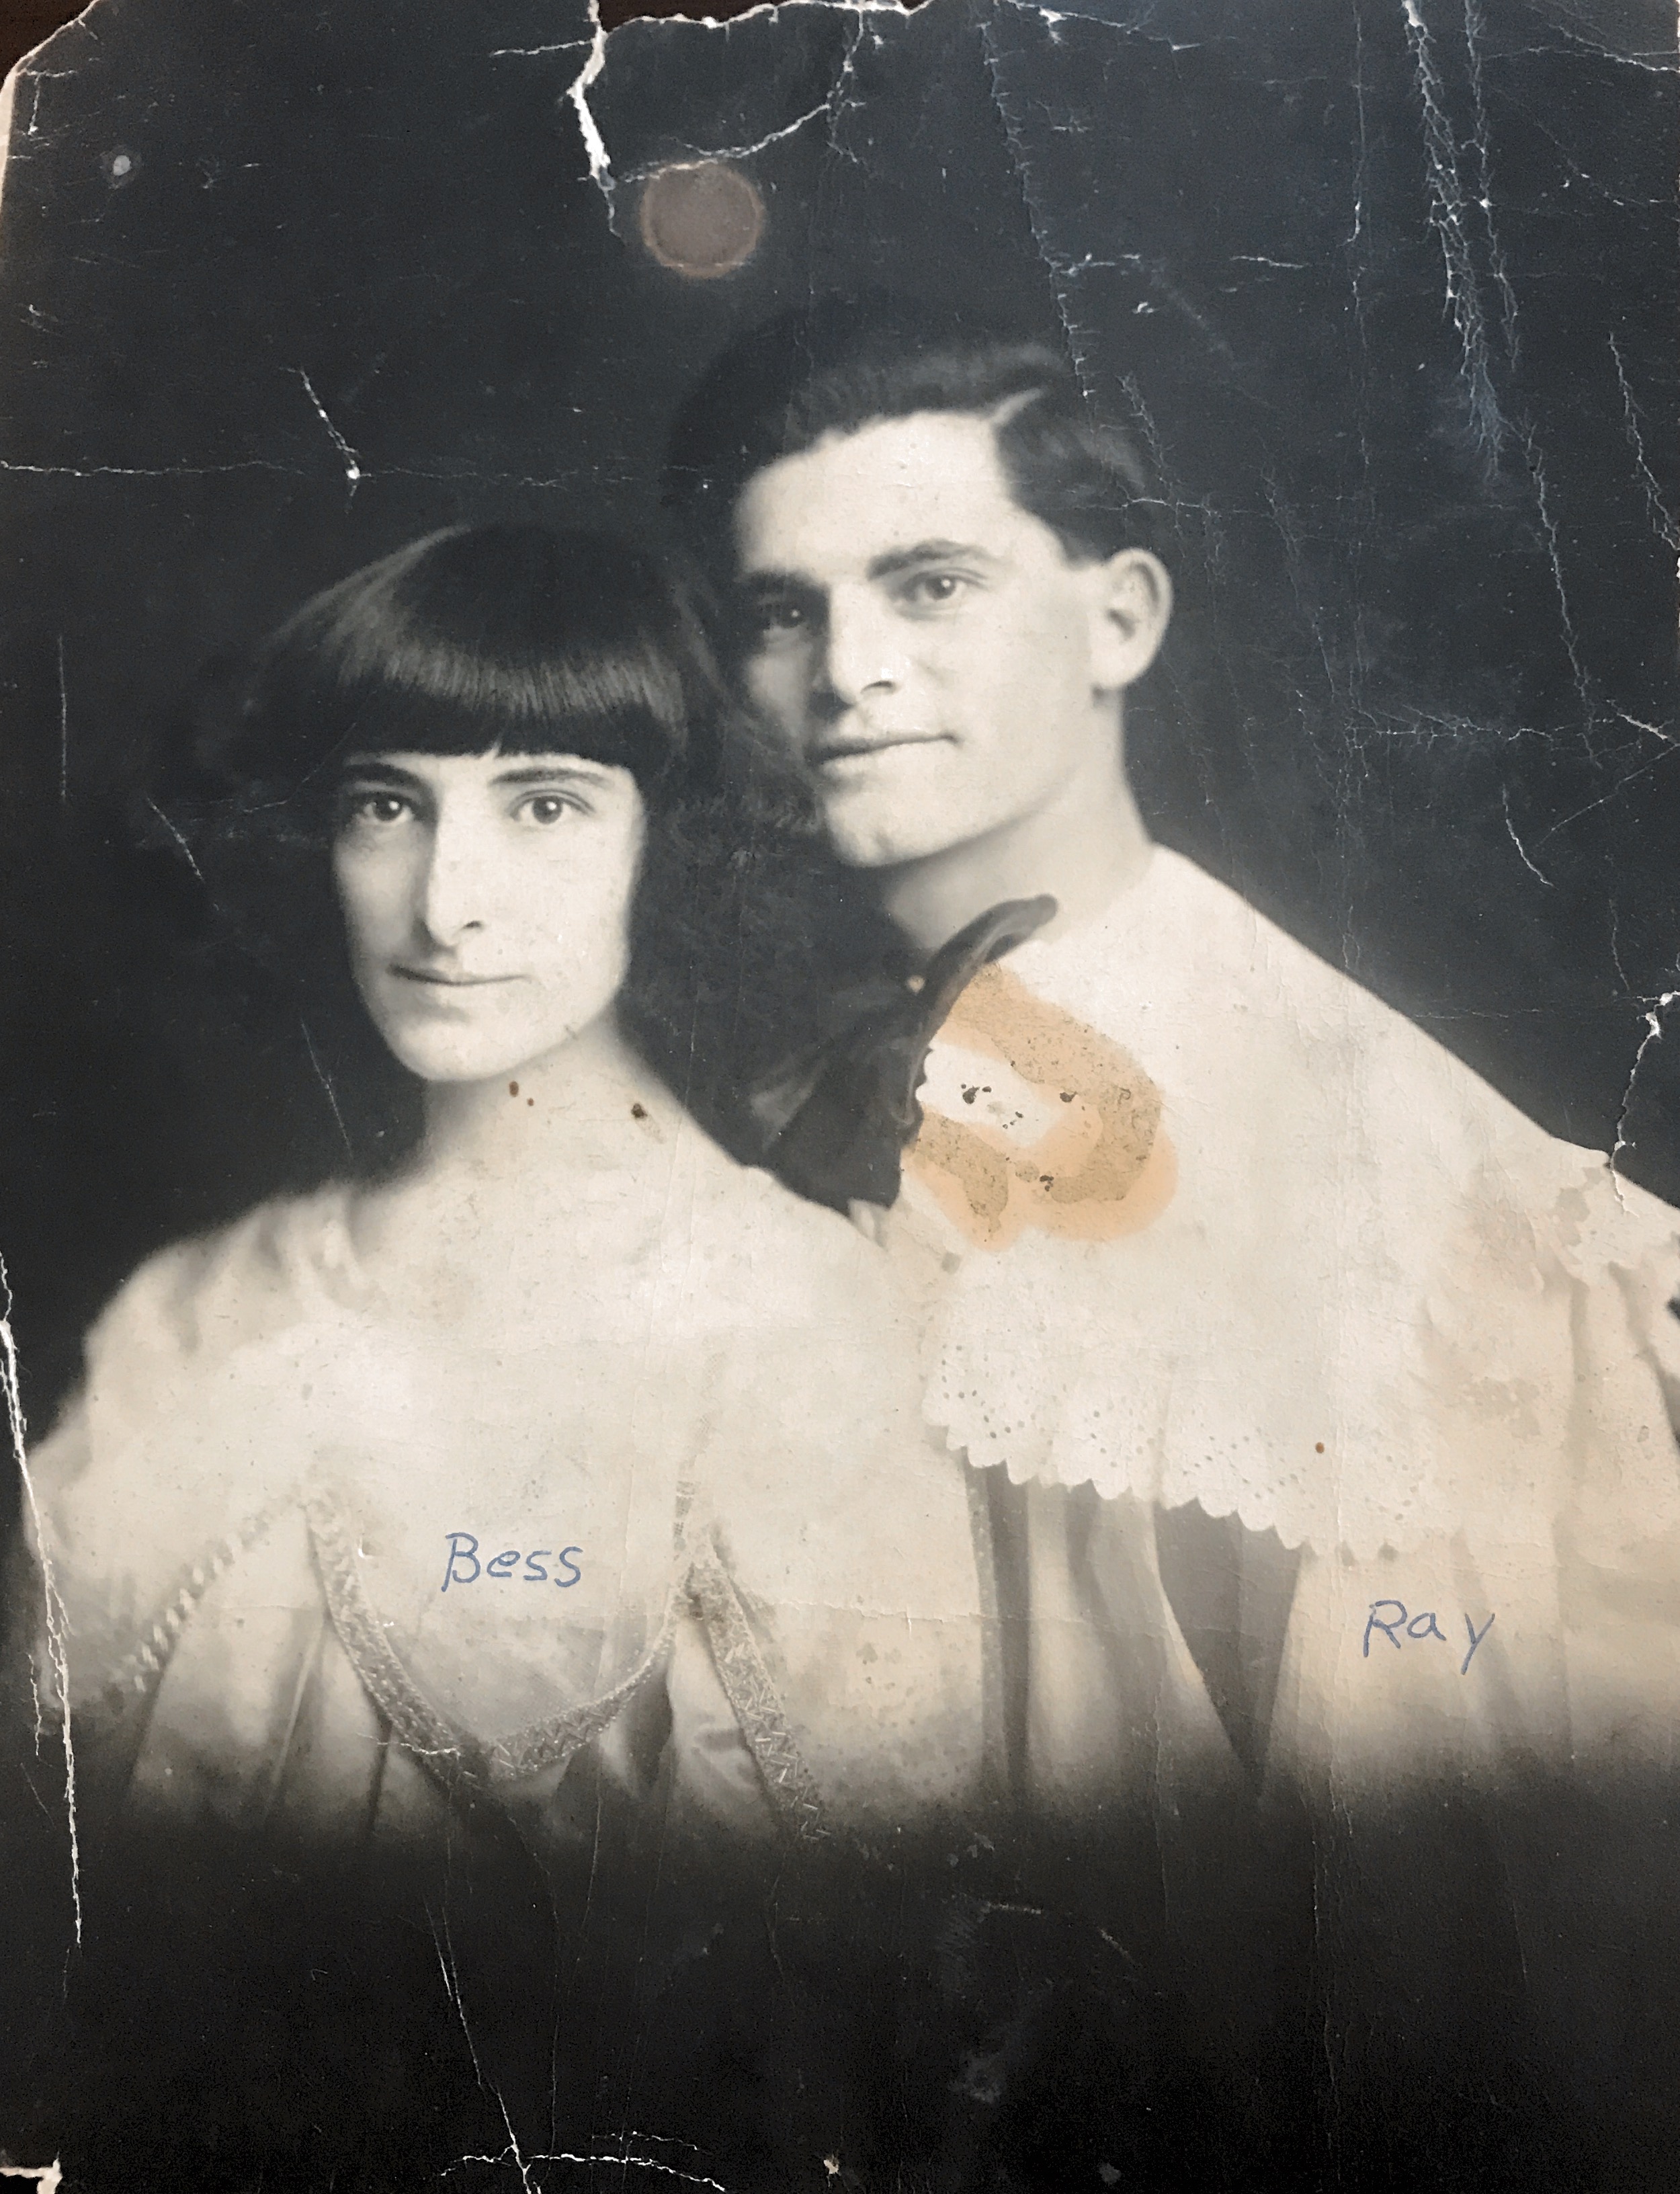 Grandma Bess (Salsburg) Ashbolt and Uncle Ray (Israel) Salsburg). Vaudeville photo. “Stage name: “Four Dancing Lubin’s”
Bess died at 24 in the 1918 Flu Epidemic